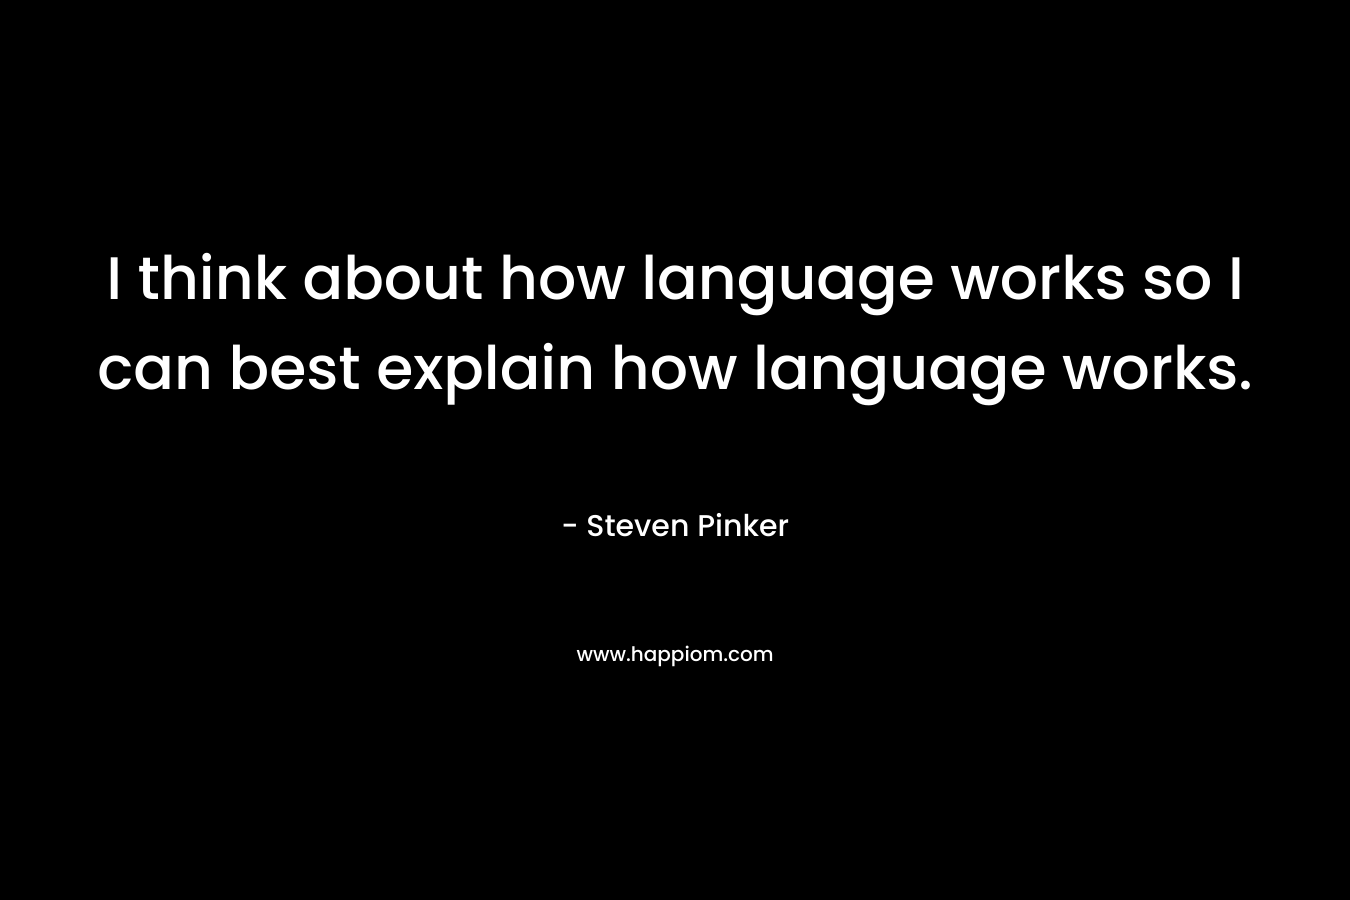 I think about how language works so I can best explain how language works.